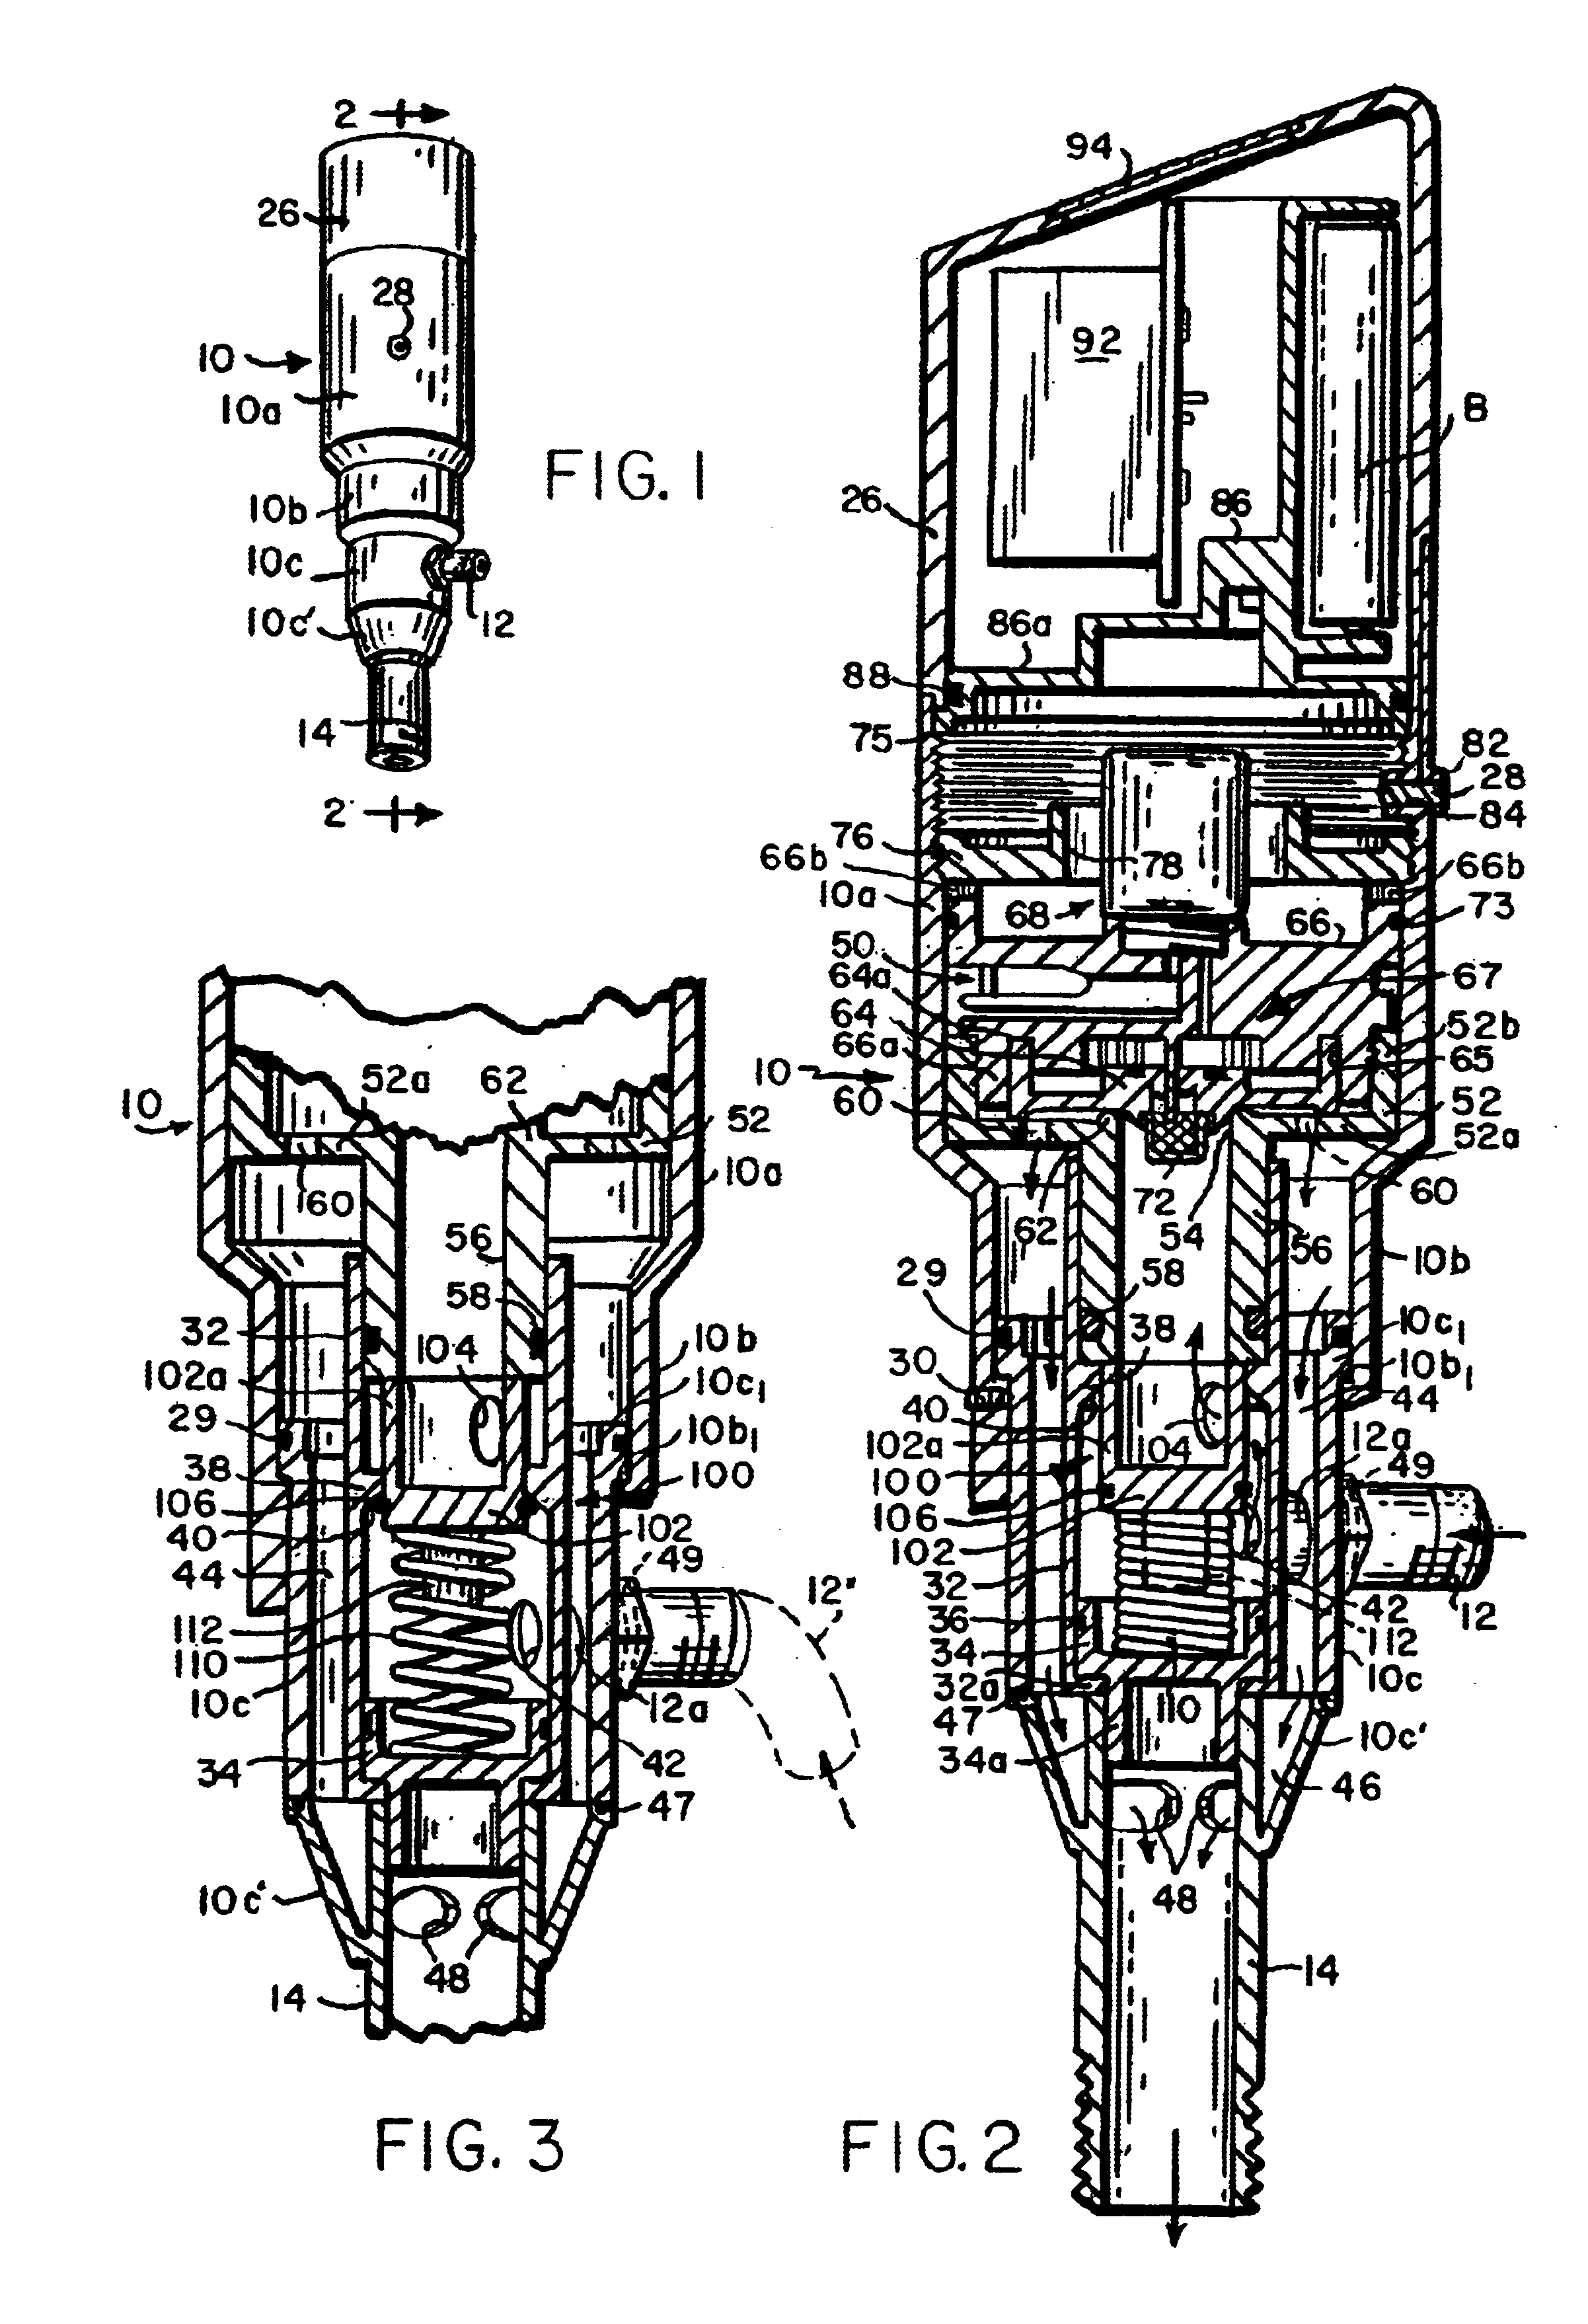 Flow control valve with automatic shutoff capability